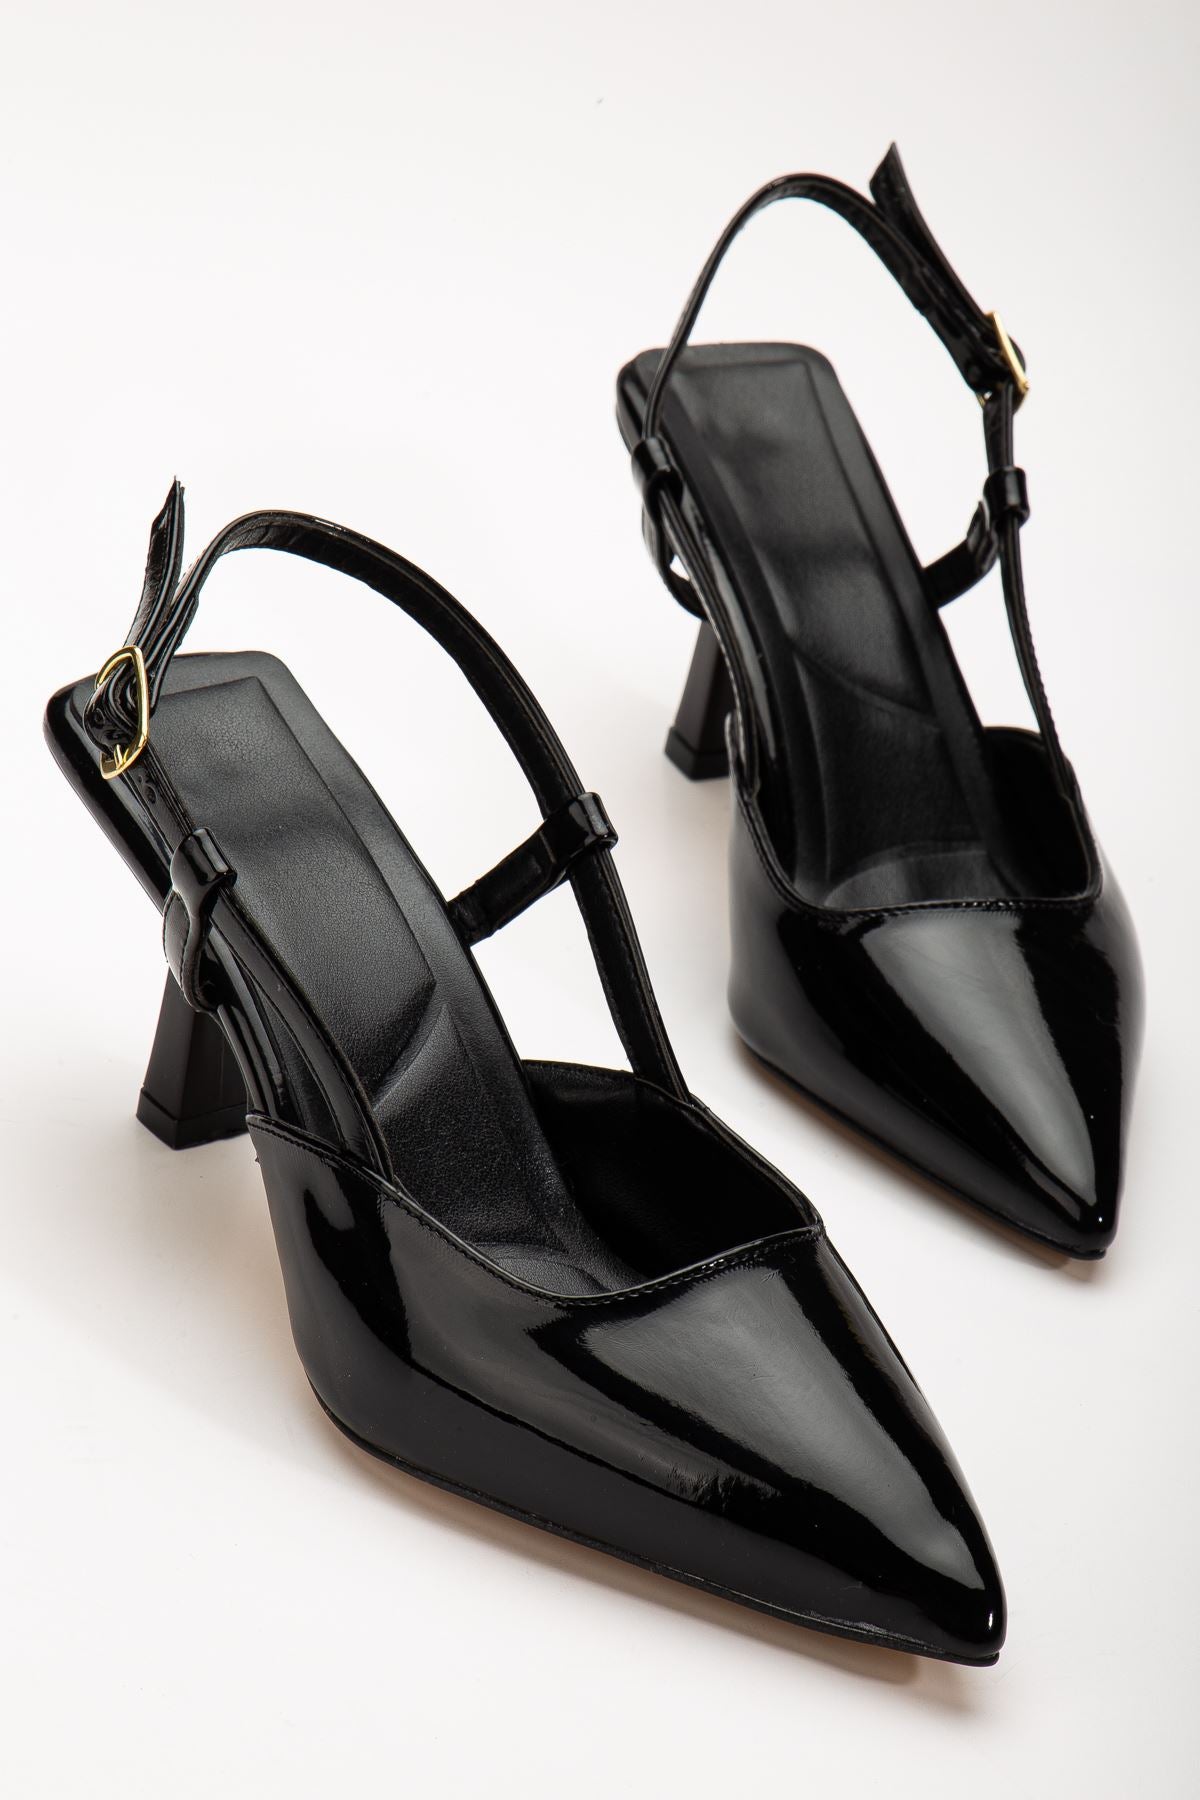 Women's Black Patent Leather Thin Heeled Shoes - STREETMODE™